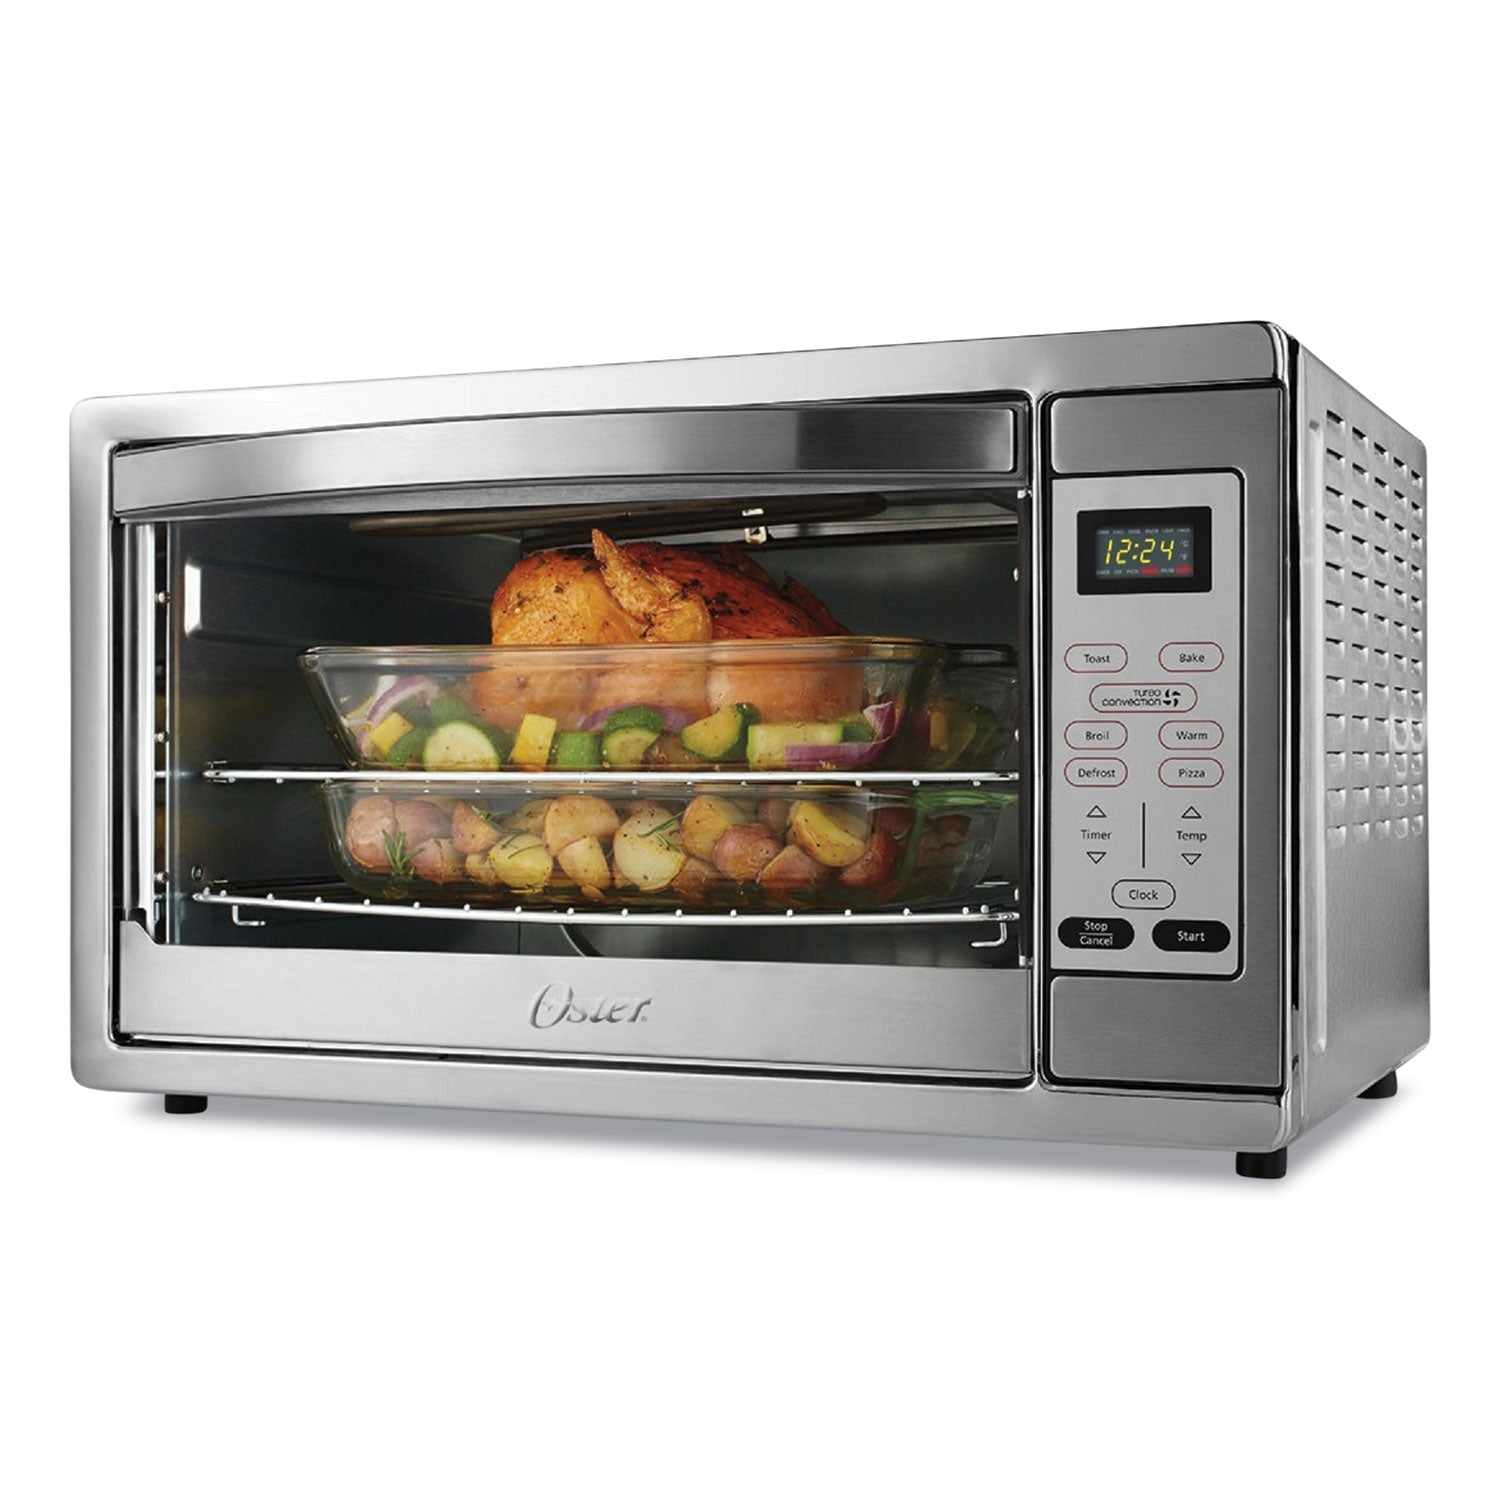 extra-large-digital-countertop-oven-2165-x-192-x-1291-stainless-steel_osrtssttvdgxl - 1